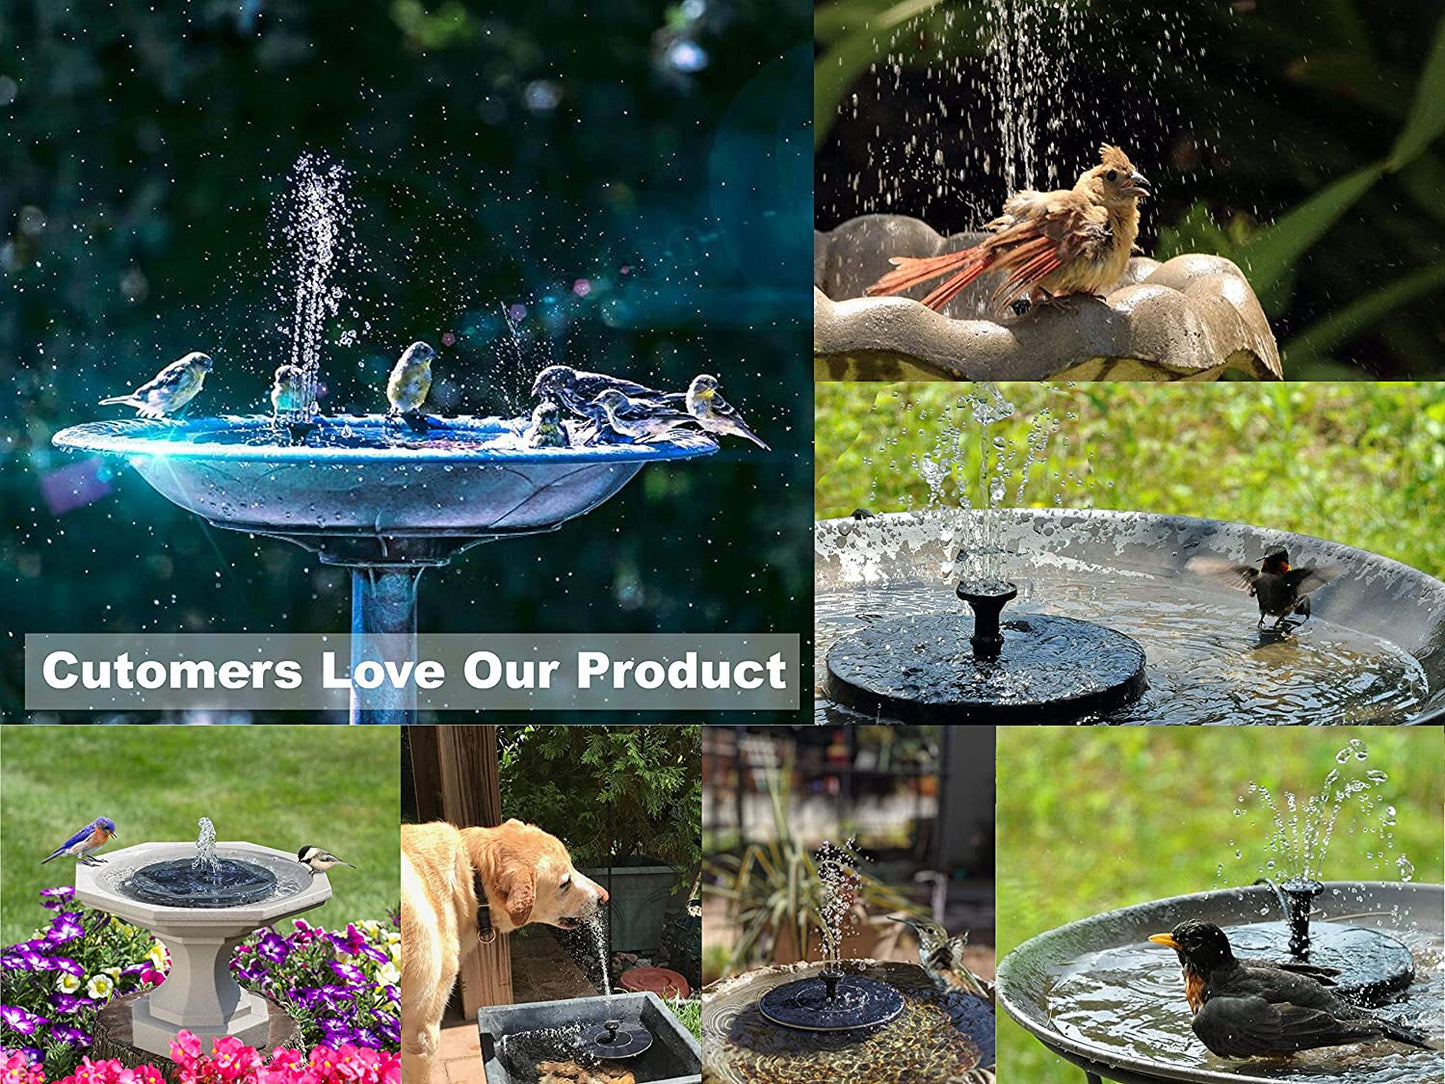 Fountain Solar Power Floating Water Pump for Pool Pond Garden and Patio Plants Round 7V 1.4W